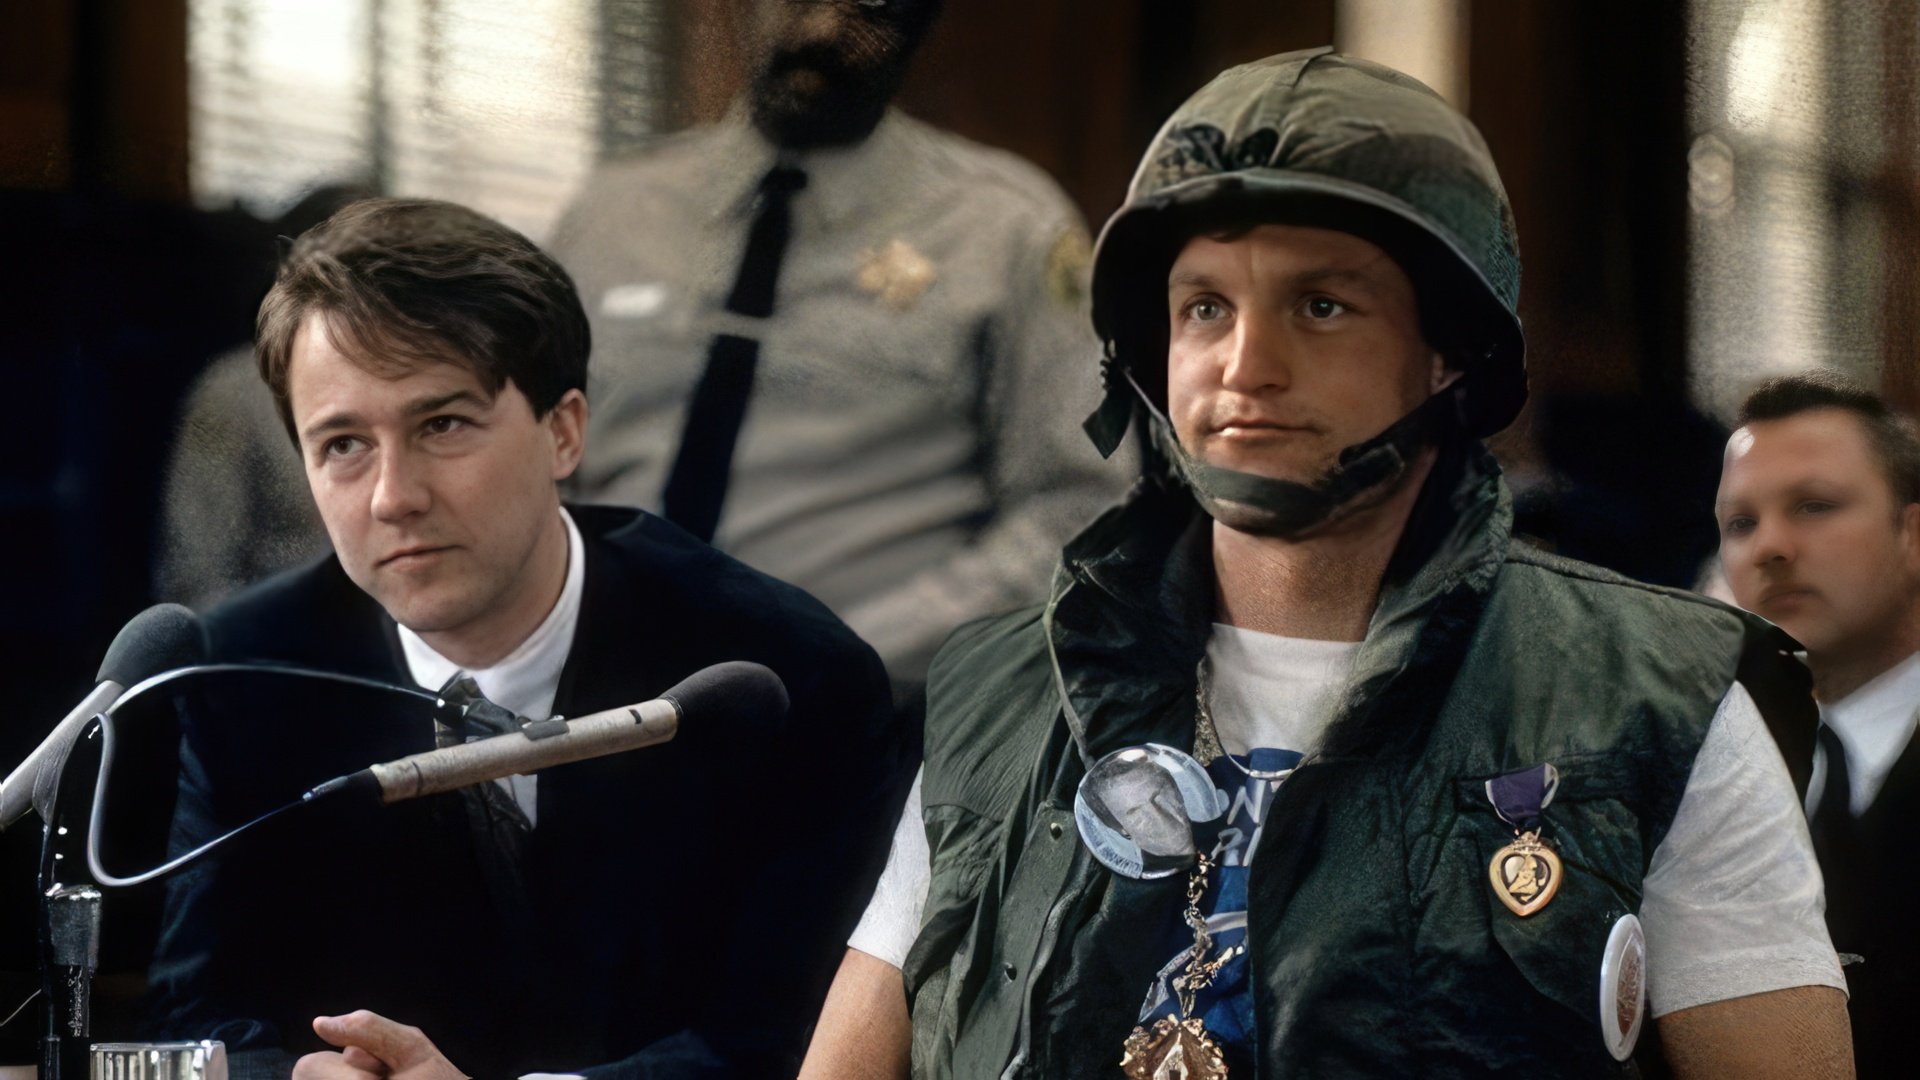 Edward Norton and Woody Harrelson in The People vs. Larry Flynt